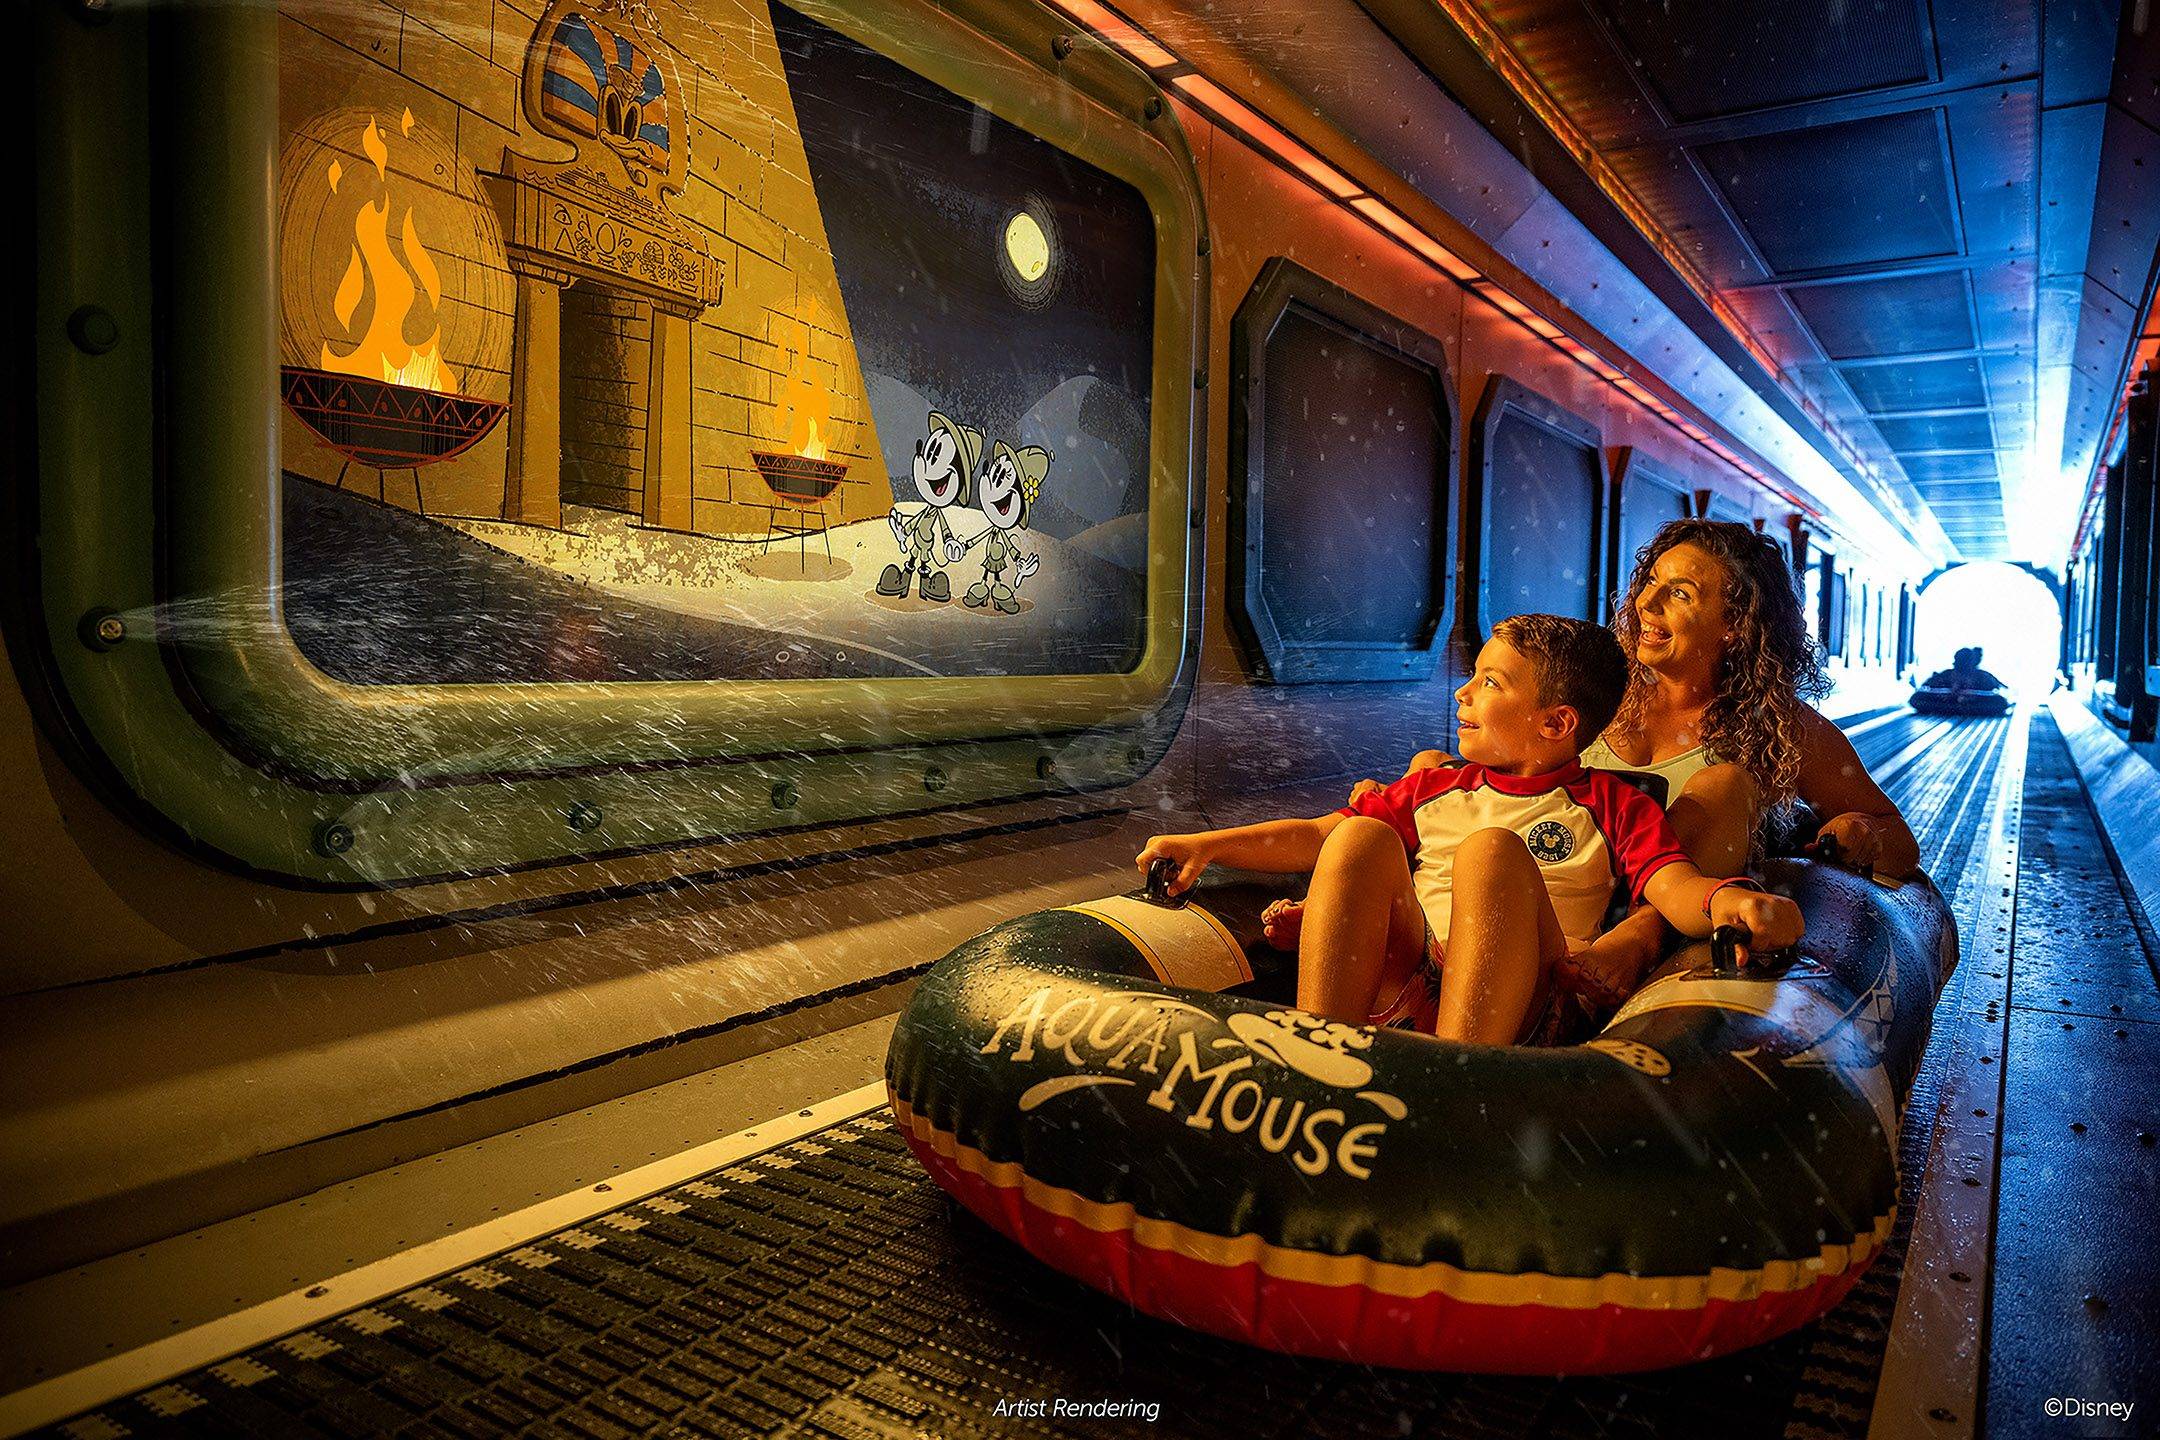 AquaMouse: Curse of the Golden Egg, Disney Cruise Line’s own attraction at sea, will introduce an all-new storyline to its existing lineup that follows Mickey Mouse and Minnie Mouse on a zany misadventure into an ancient temple. Suspended high above the upper decks, powerful jets will propel two-person ride vehicles through 760 feet of winding tubes, offering breathtaking views of the ocean and the ship below.